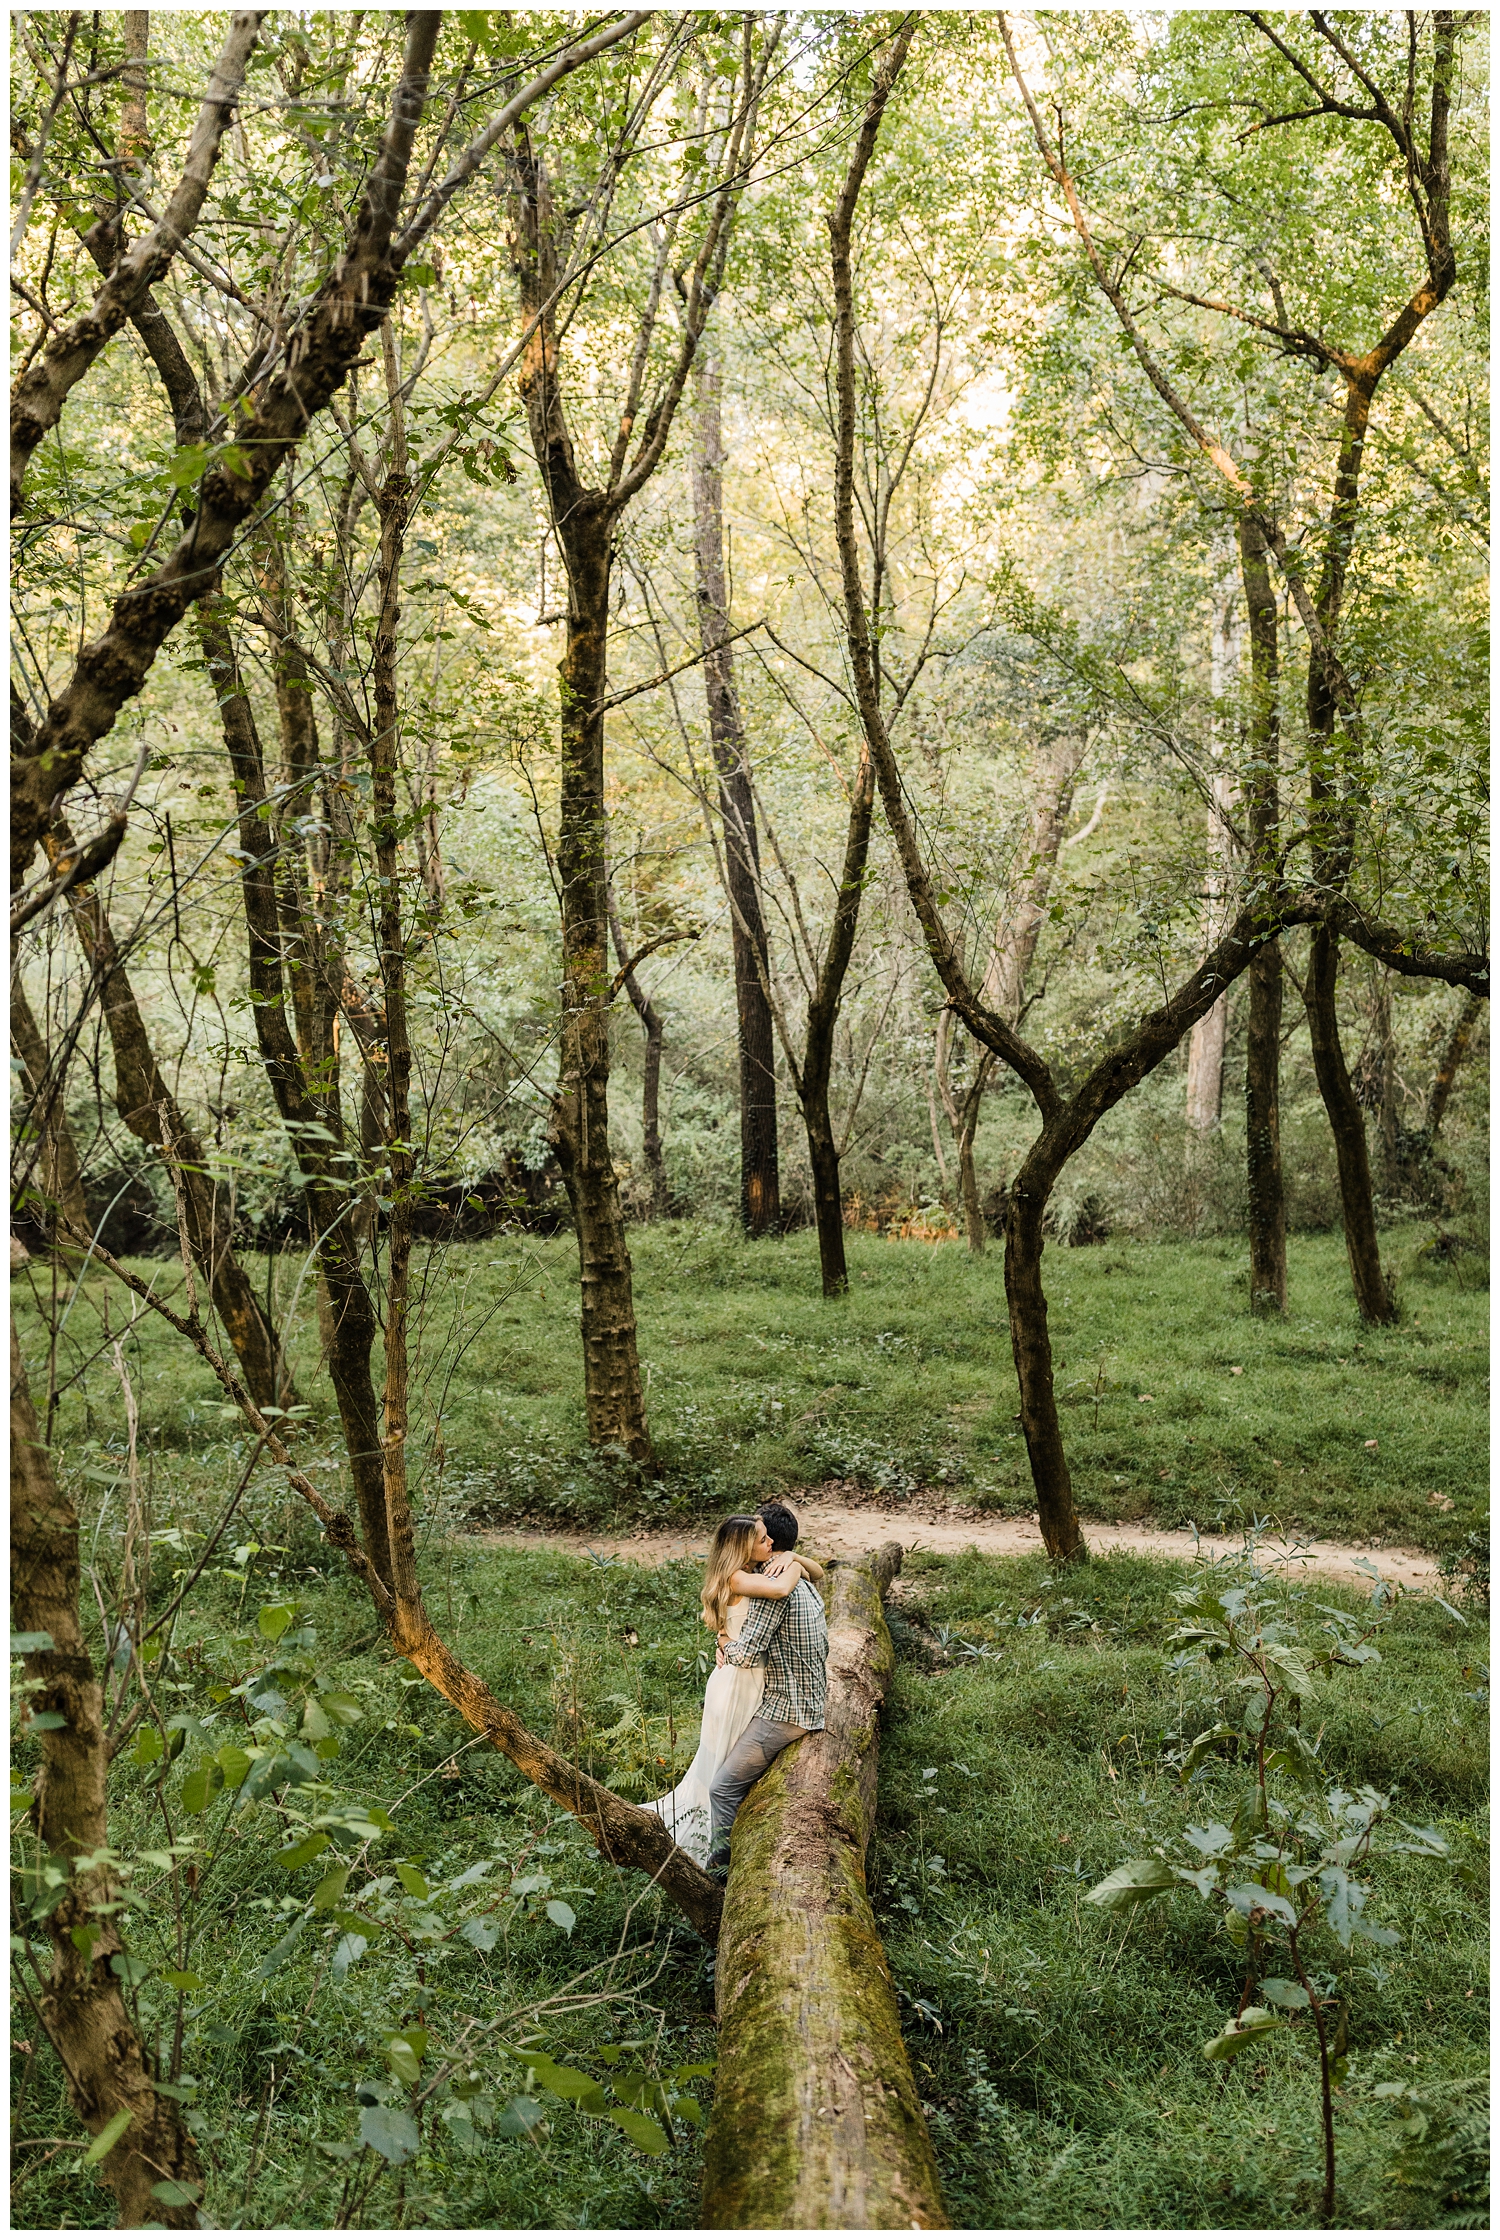 Newly engaged couple in Lullwater Park hugging on a log during an engagement session in a lush, green forest in Atlanta, GA